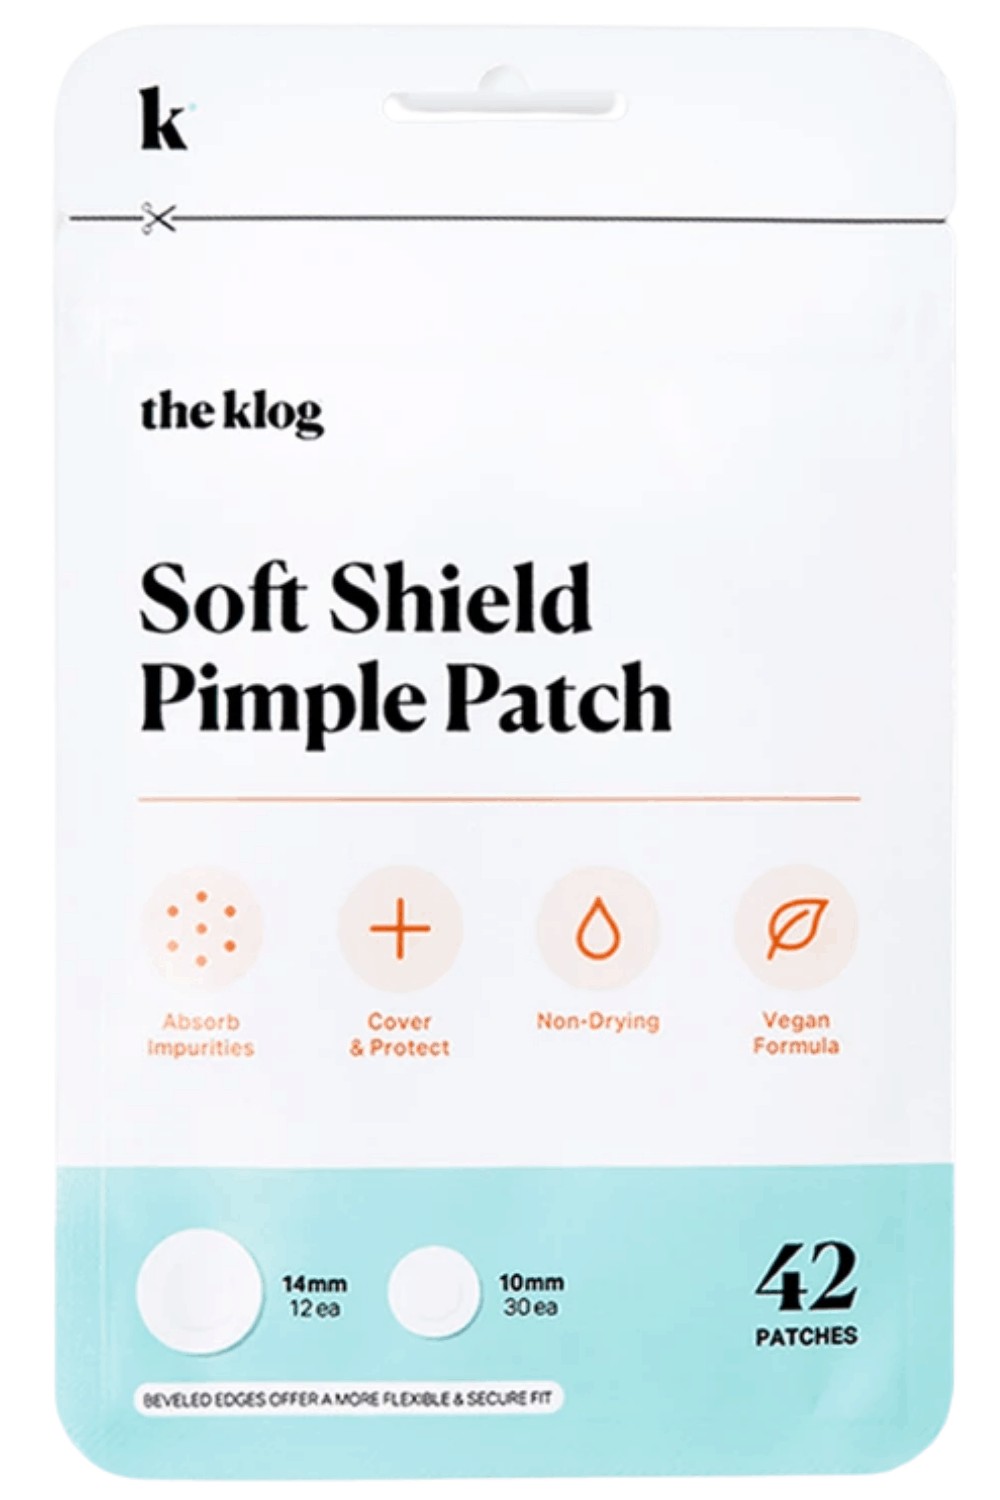 THE KLOG – Soft Shield Pimple Patch